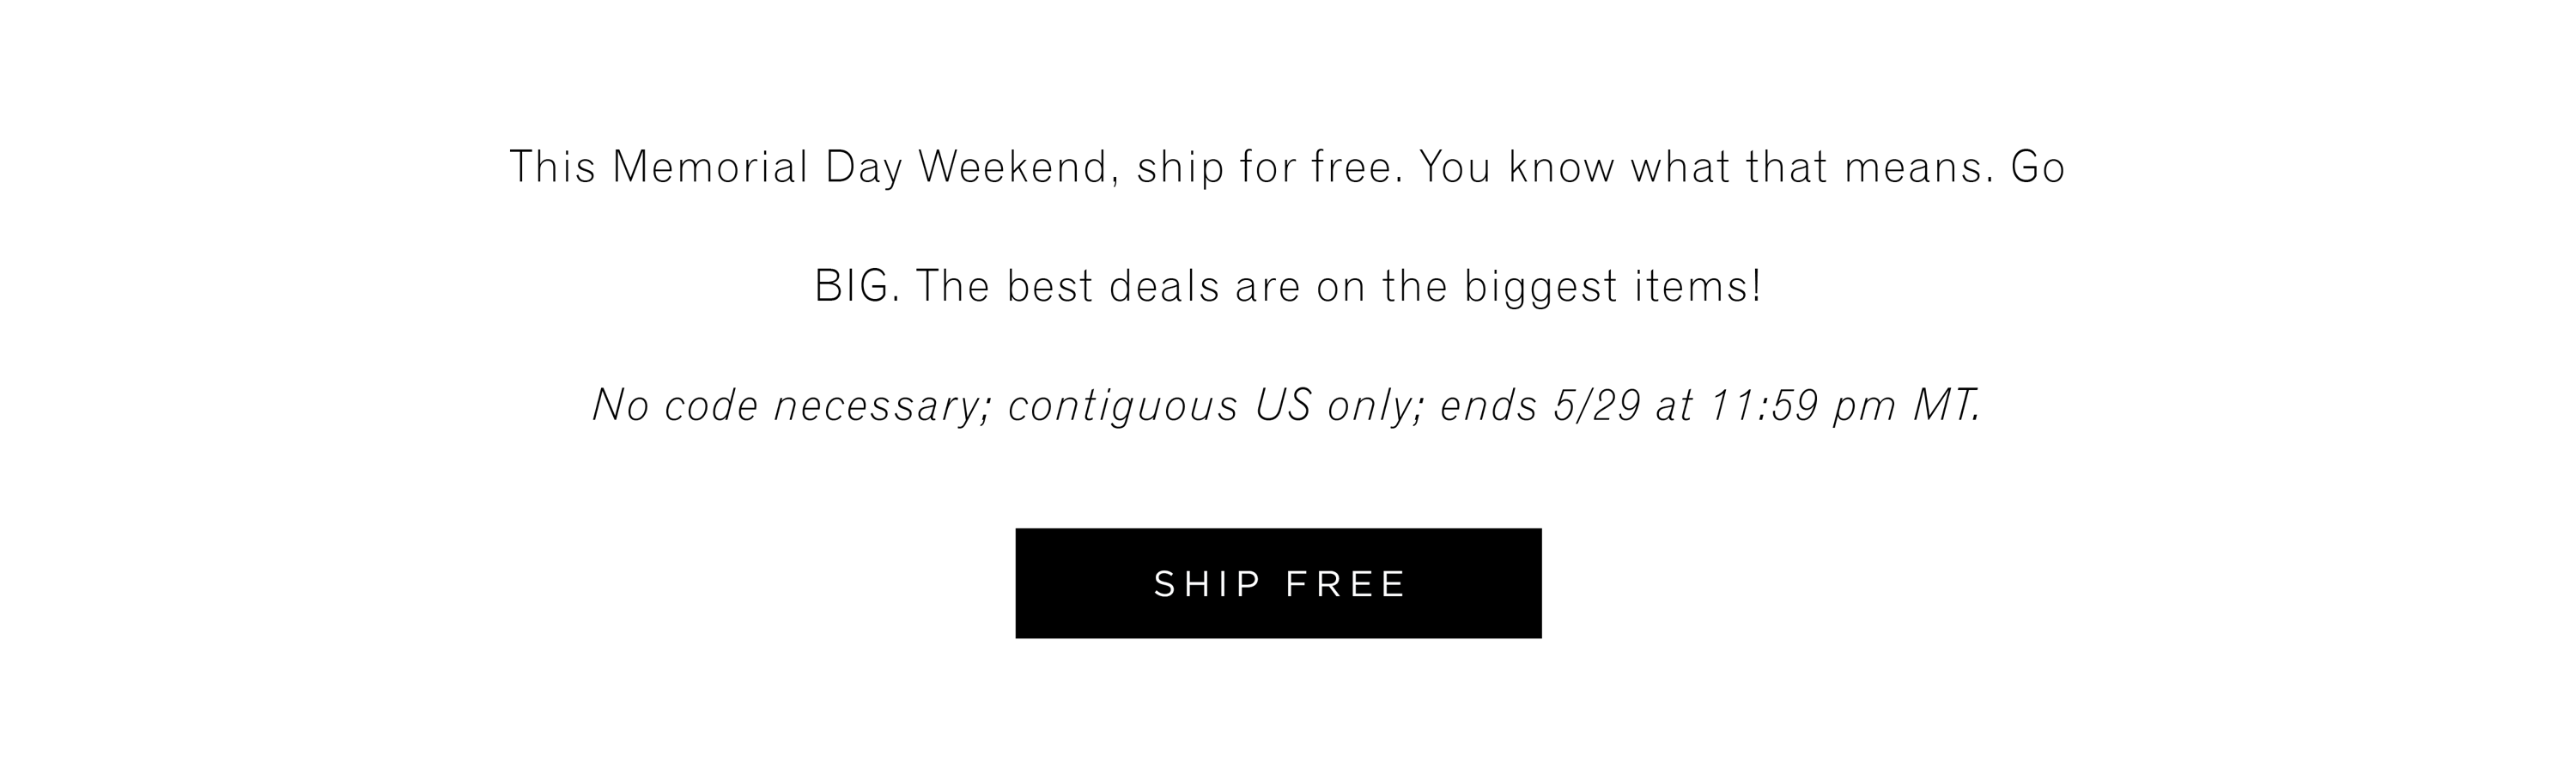 This Memorial Day Weekend, ship for free. You know what that means, Go BIG. The best deals are on the biggest items! No code necessary; contiguous US only; ends 5/29 at 11:59pm MT. SHIP FREE